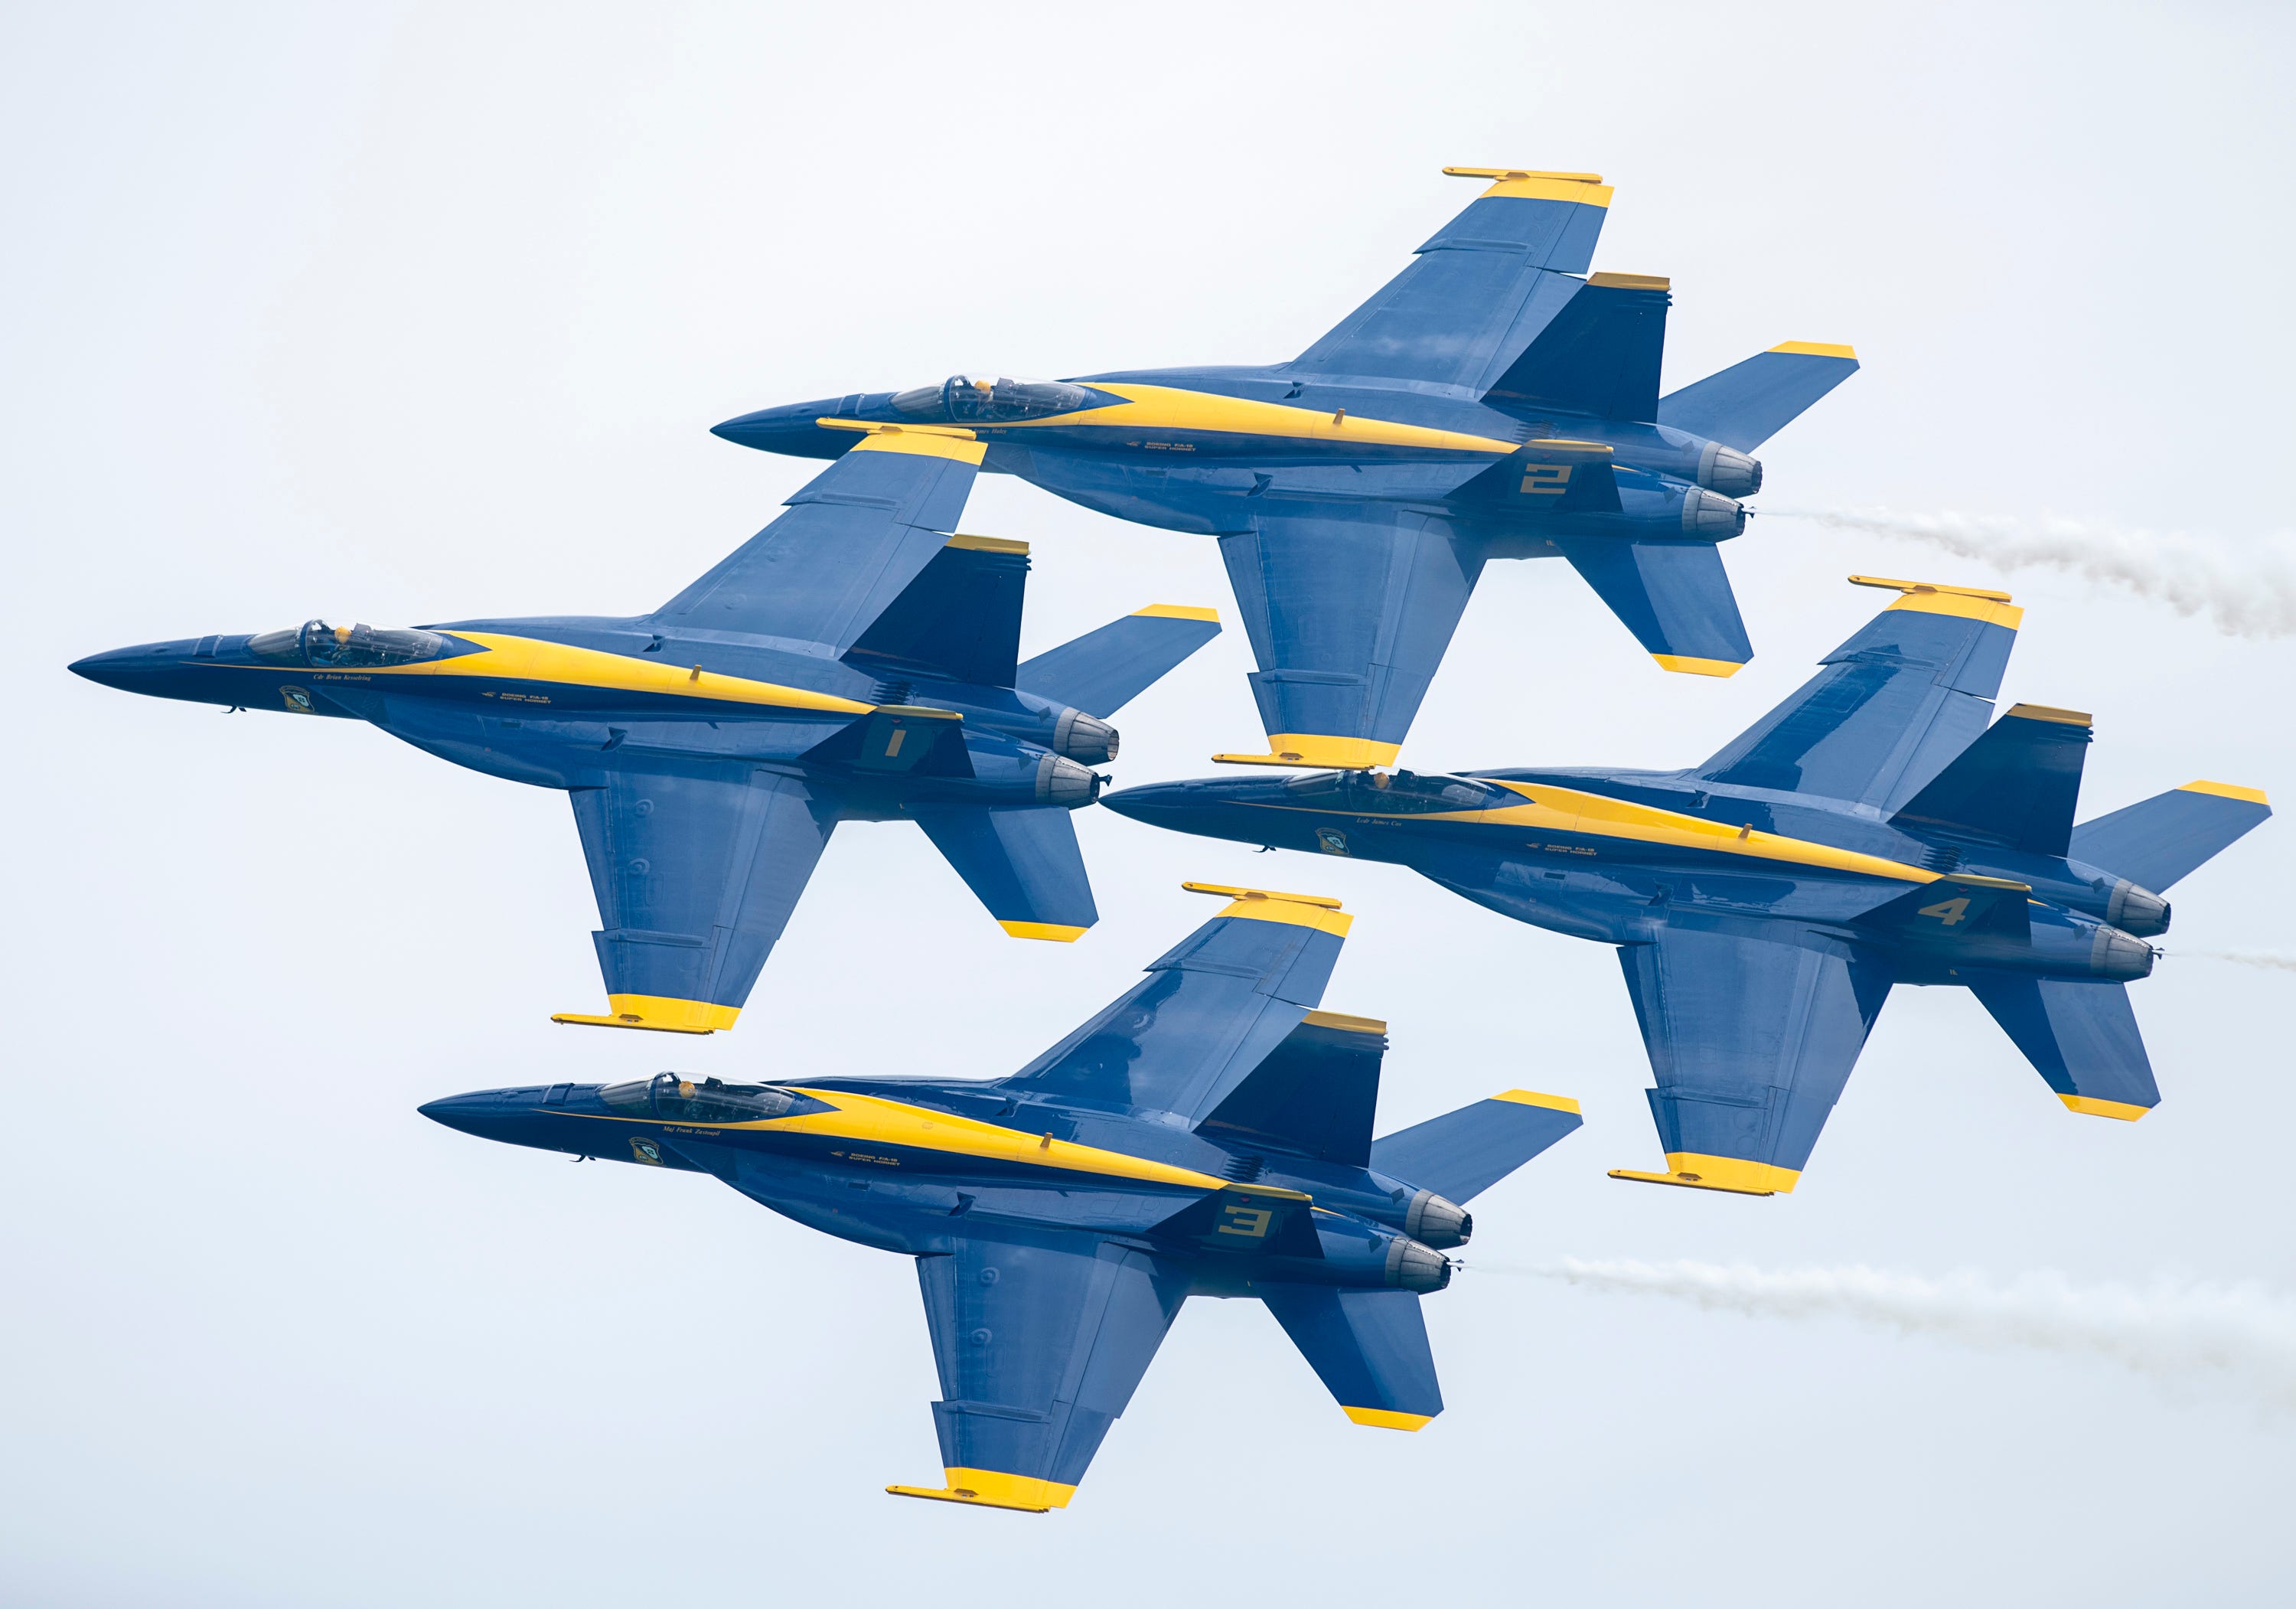 Blue Angels practice schedule gives you plenty of days to see jets fly